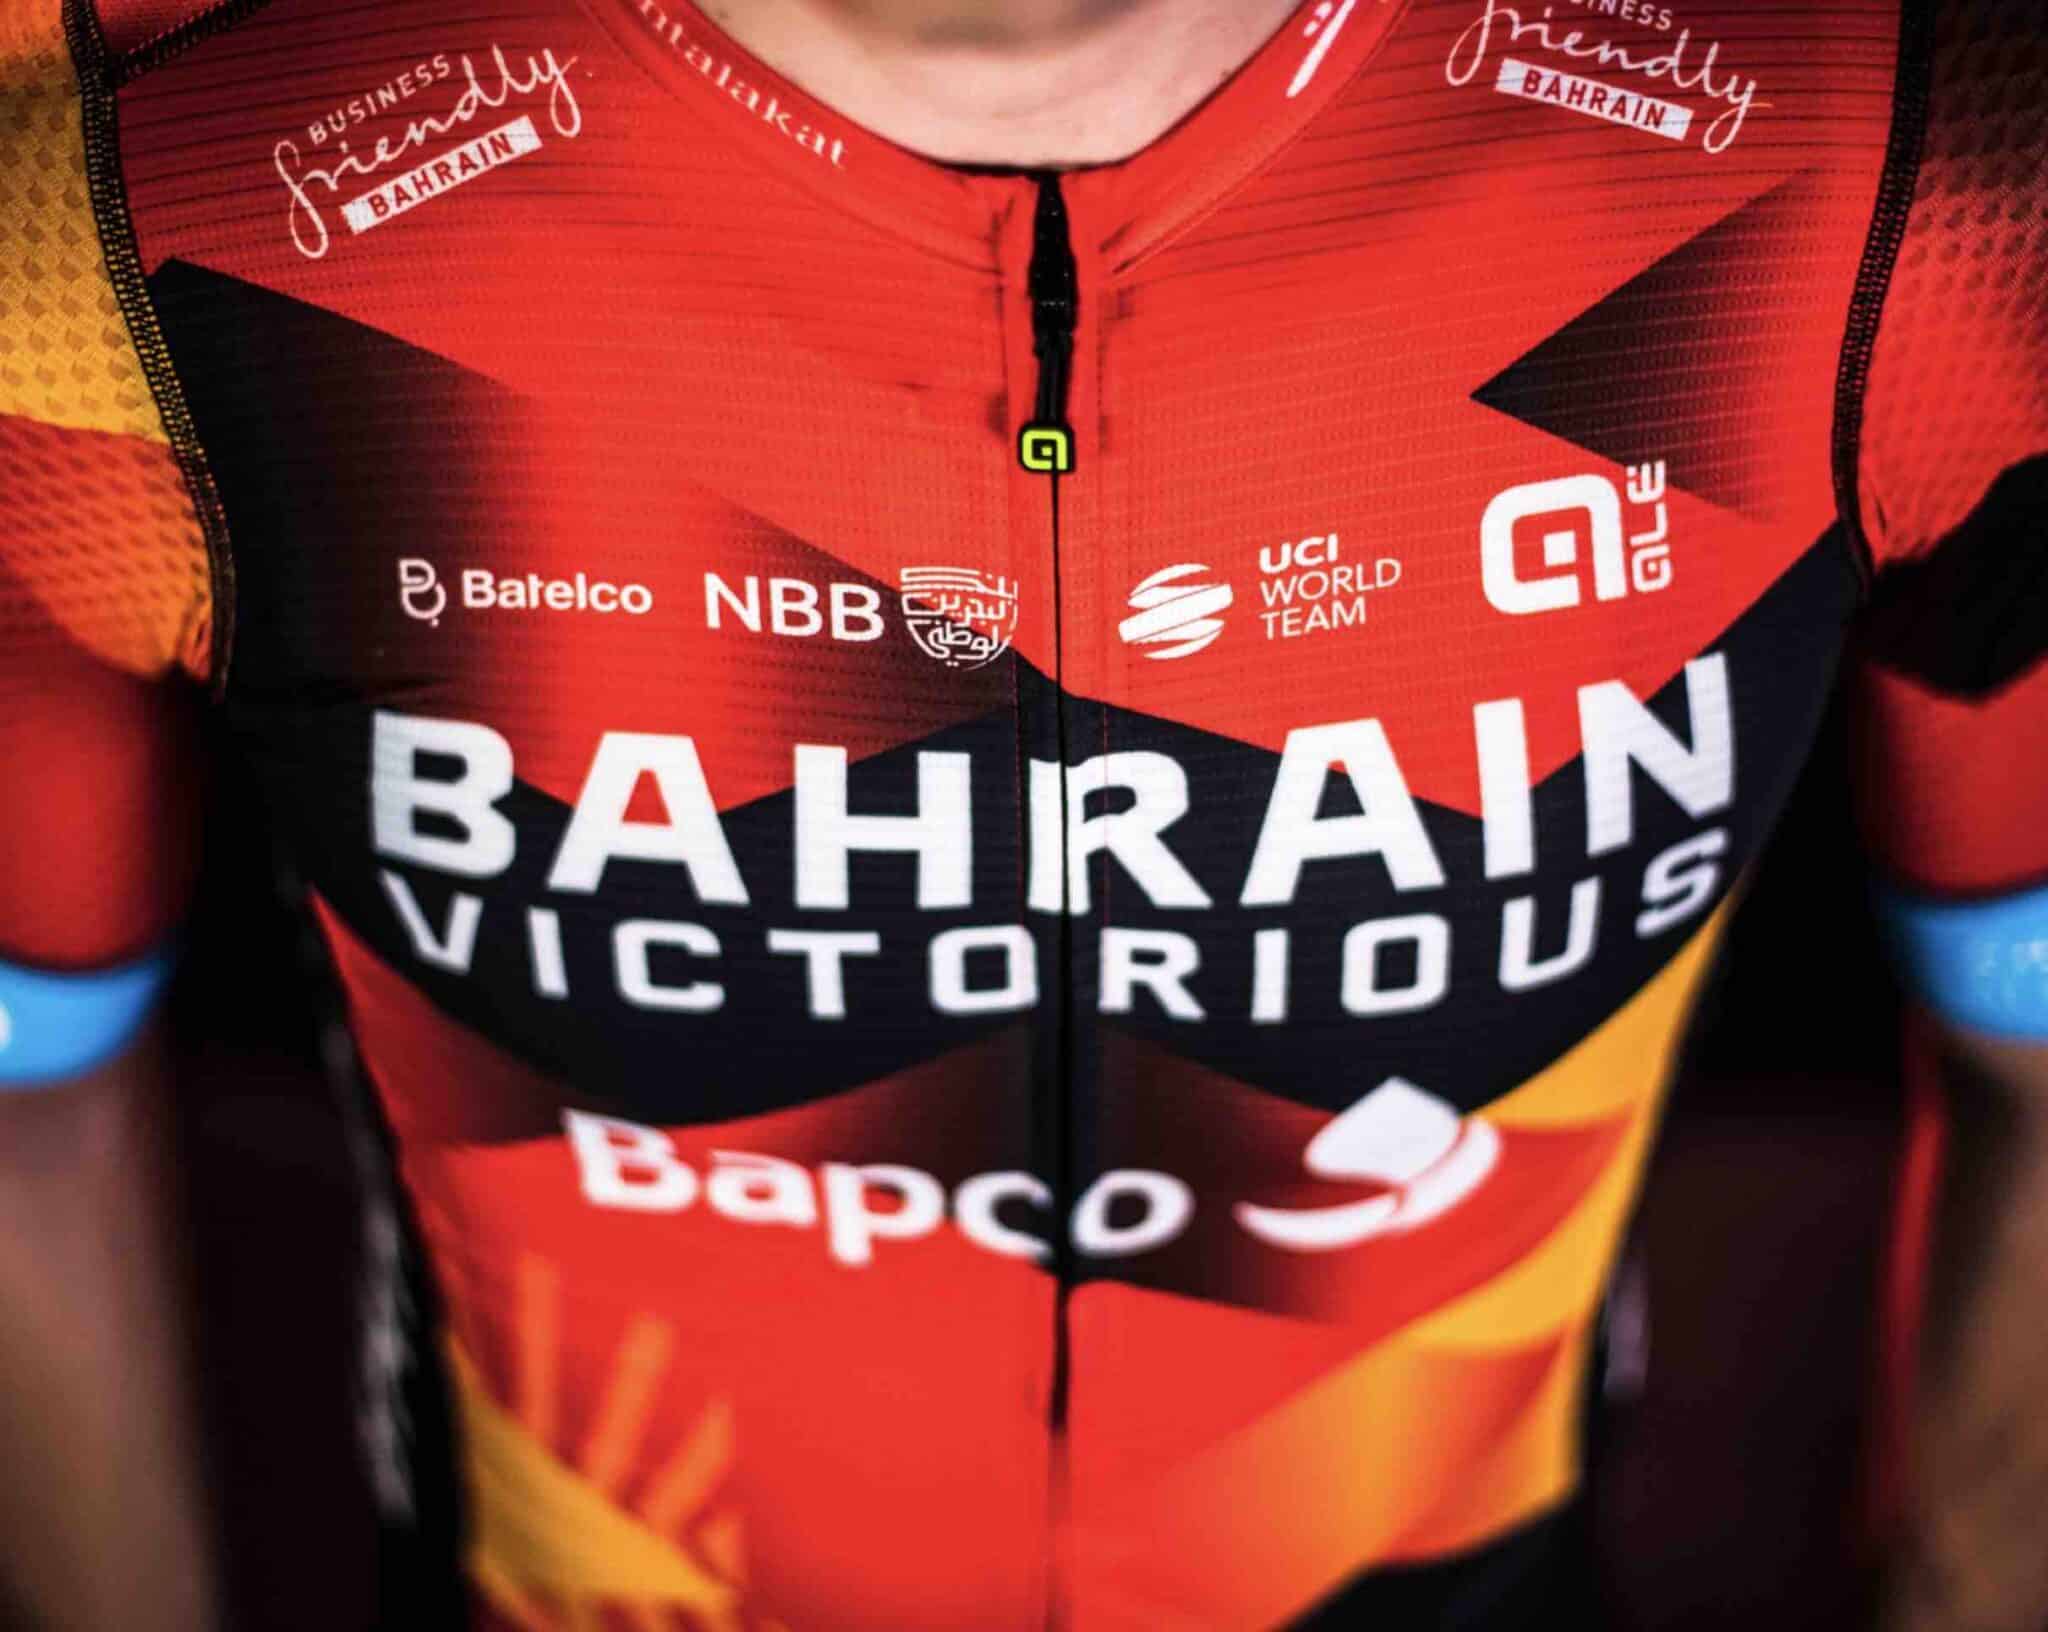 Bahrain Victorious Fiche équipe Todaycycling